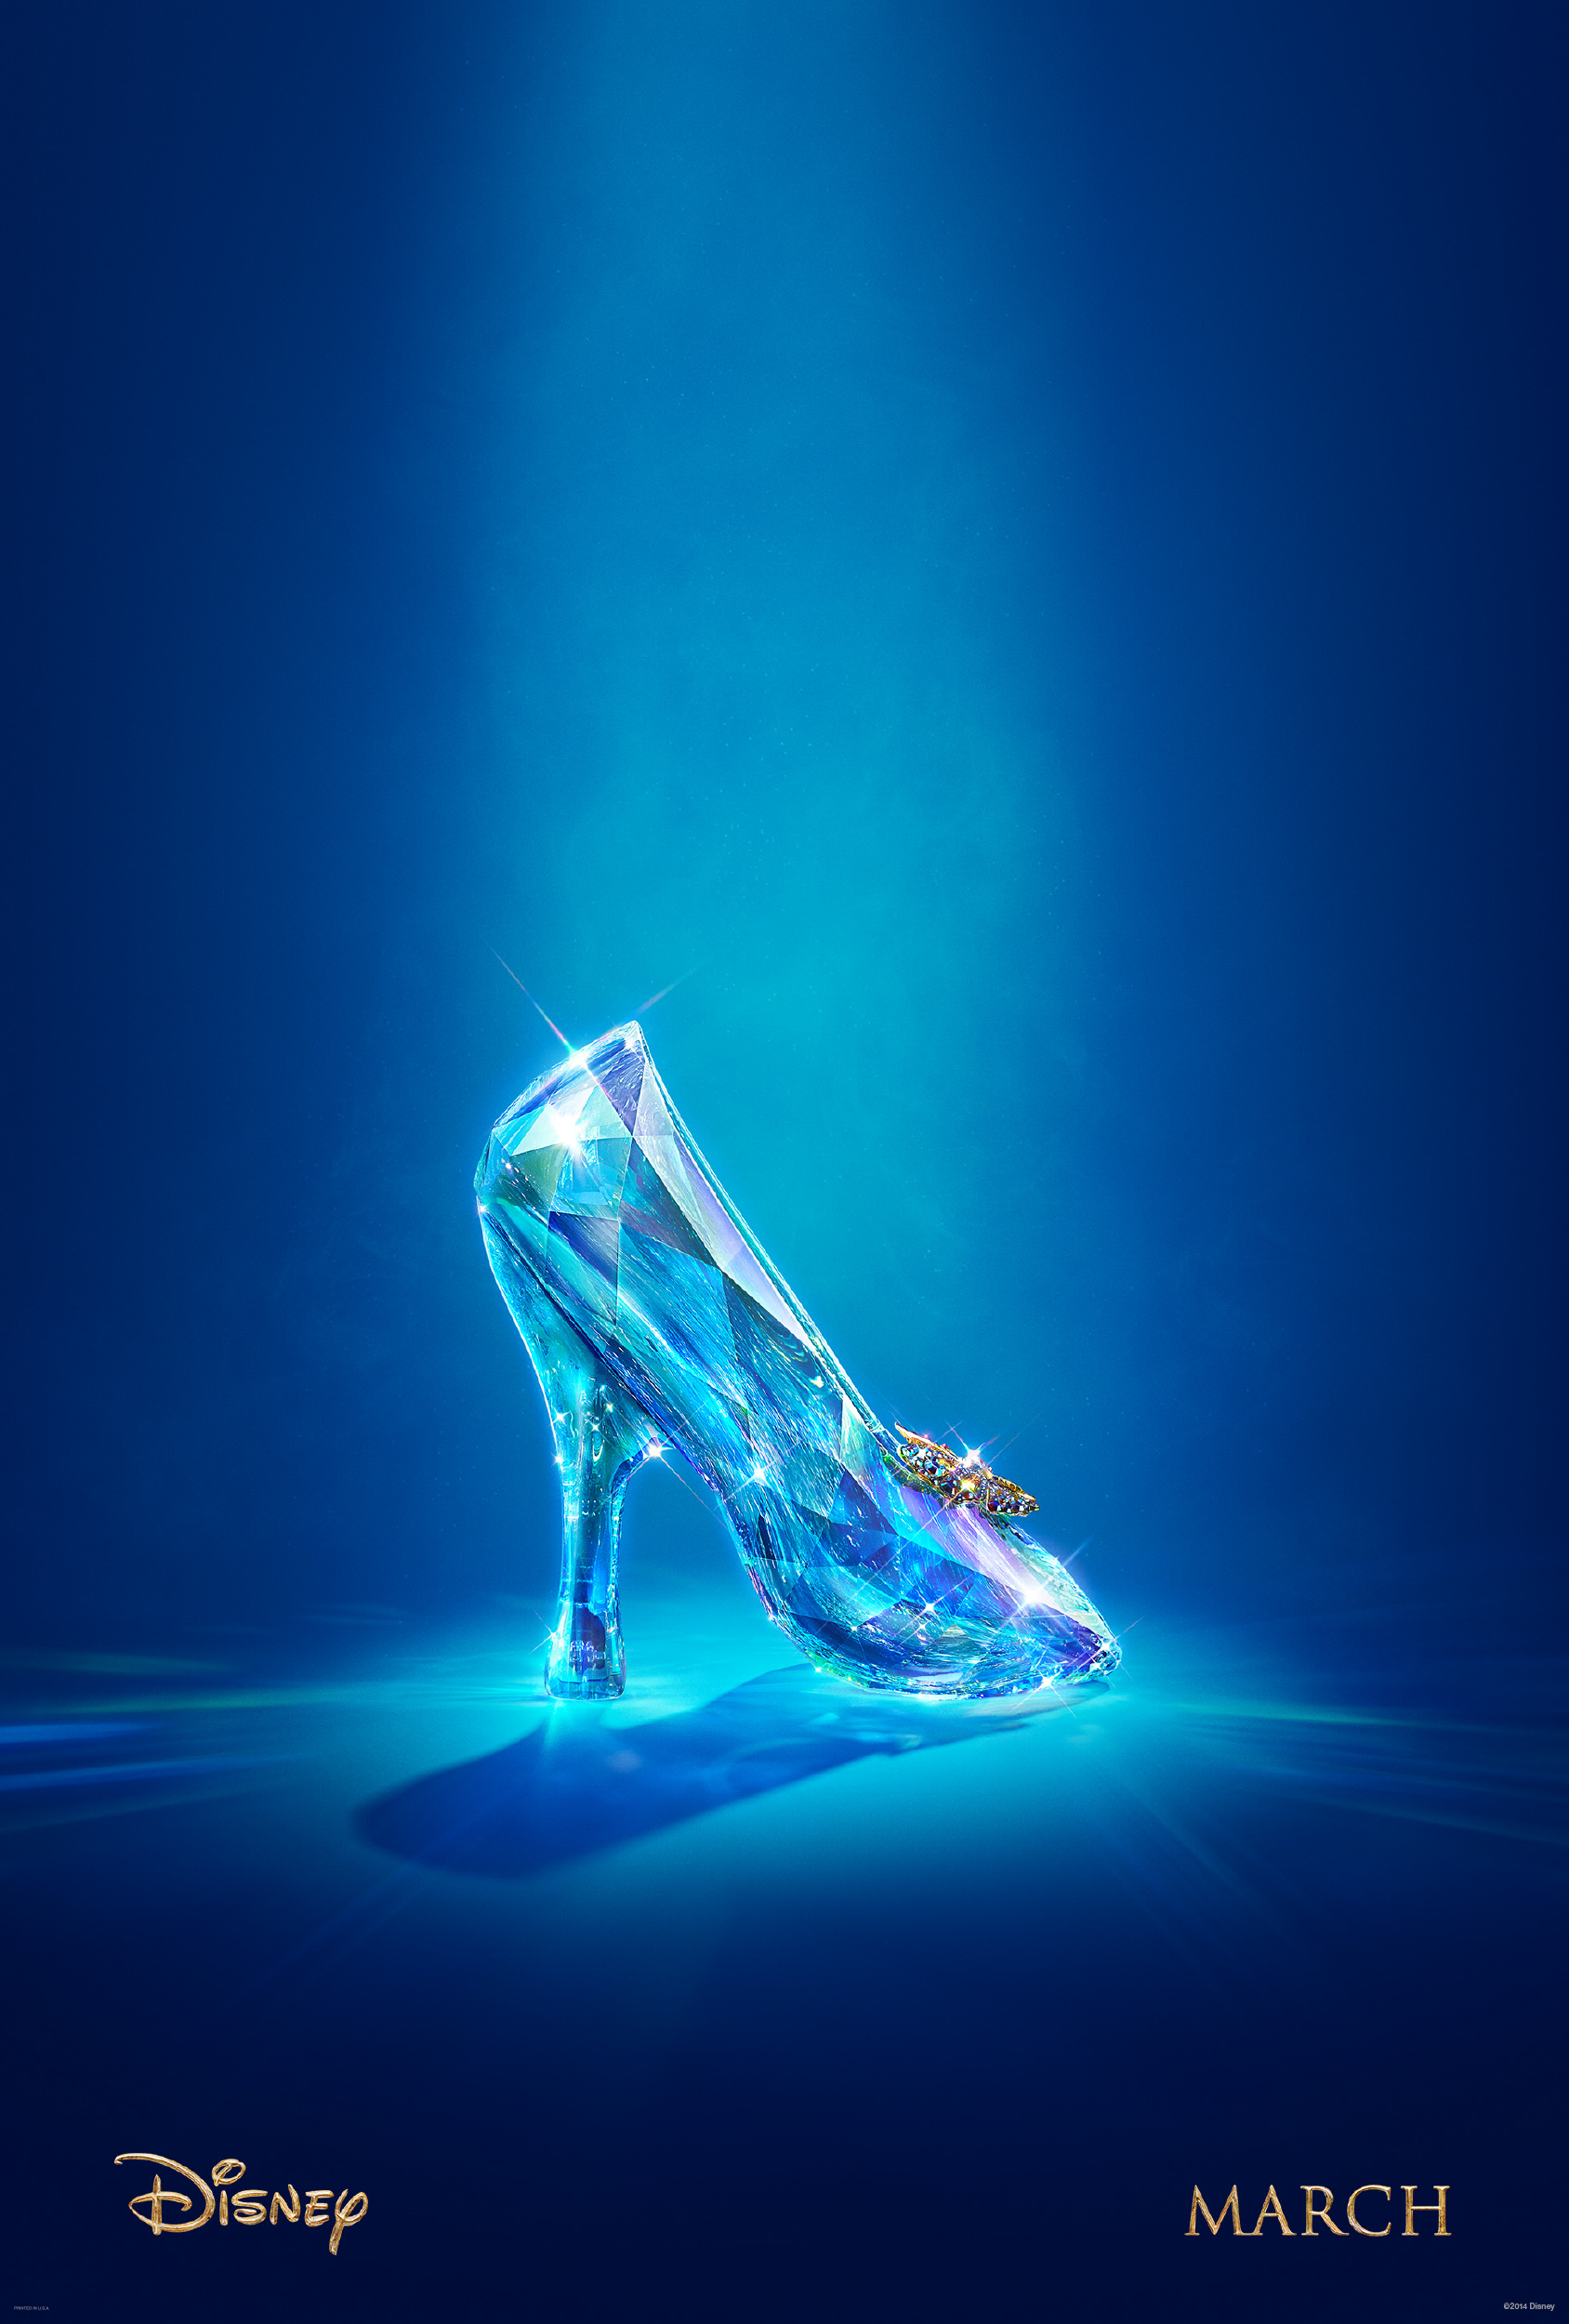 First Live Action Cinderella Poster Teaser Trailer Showcases The